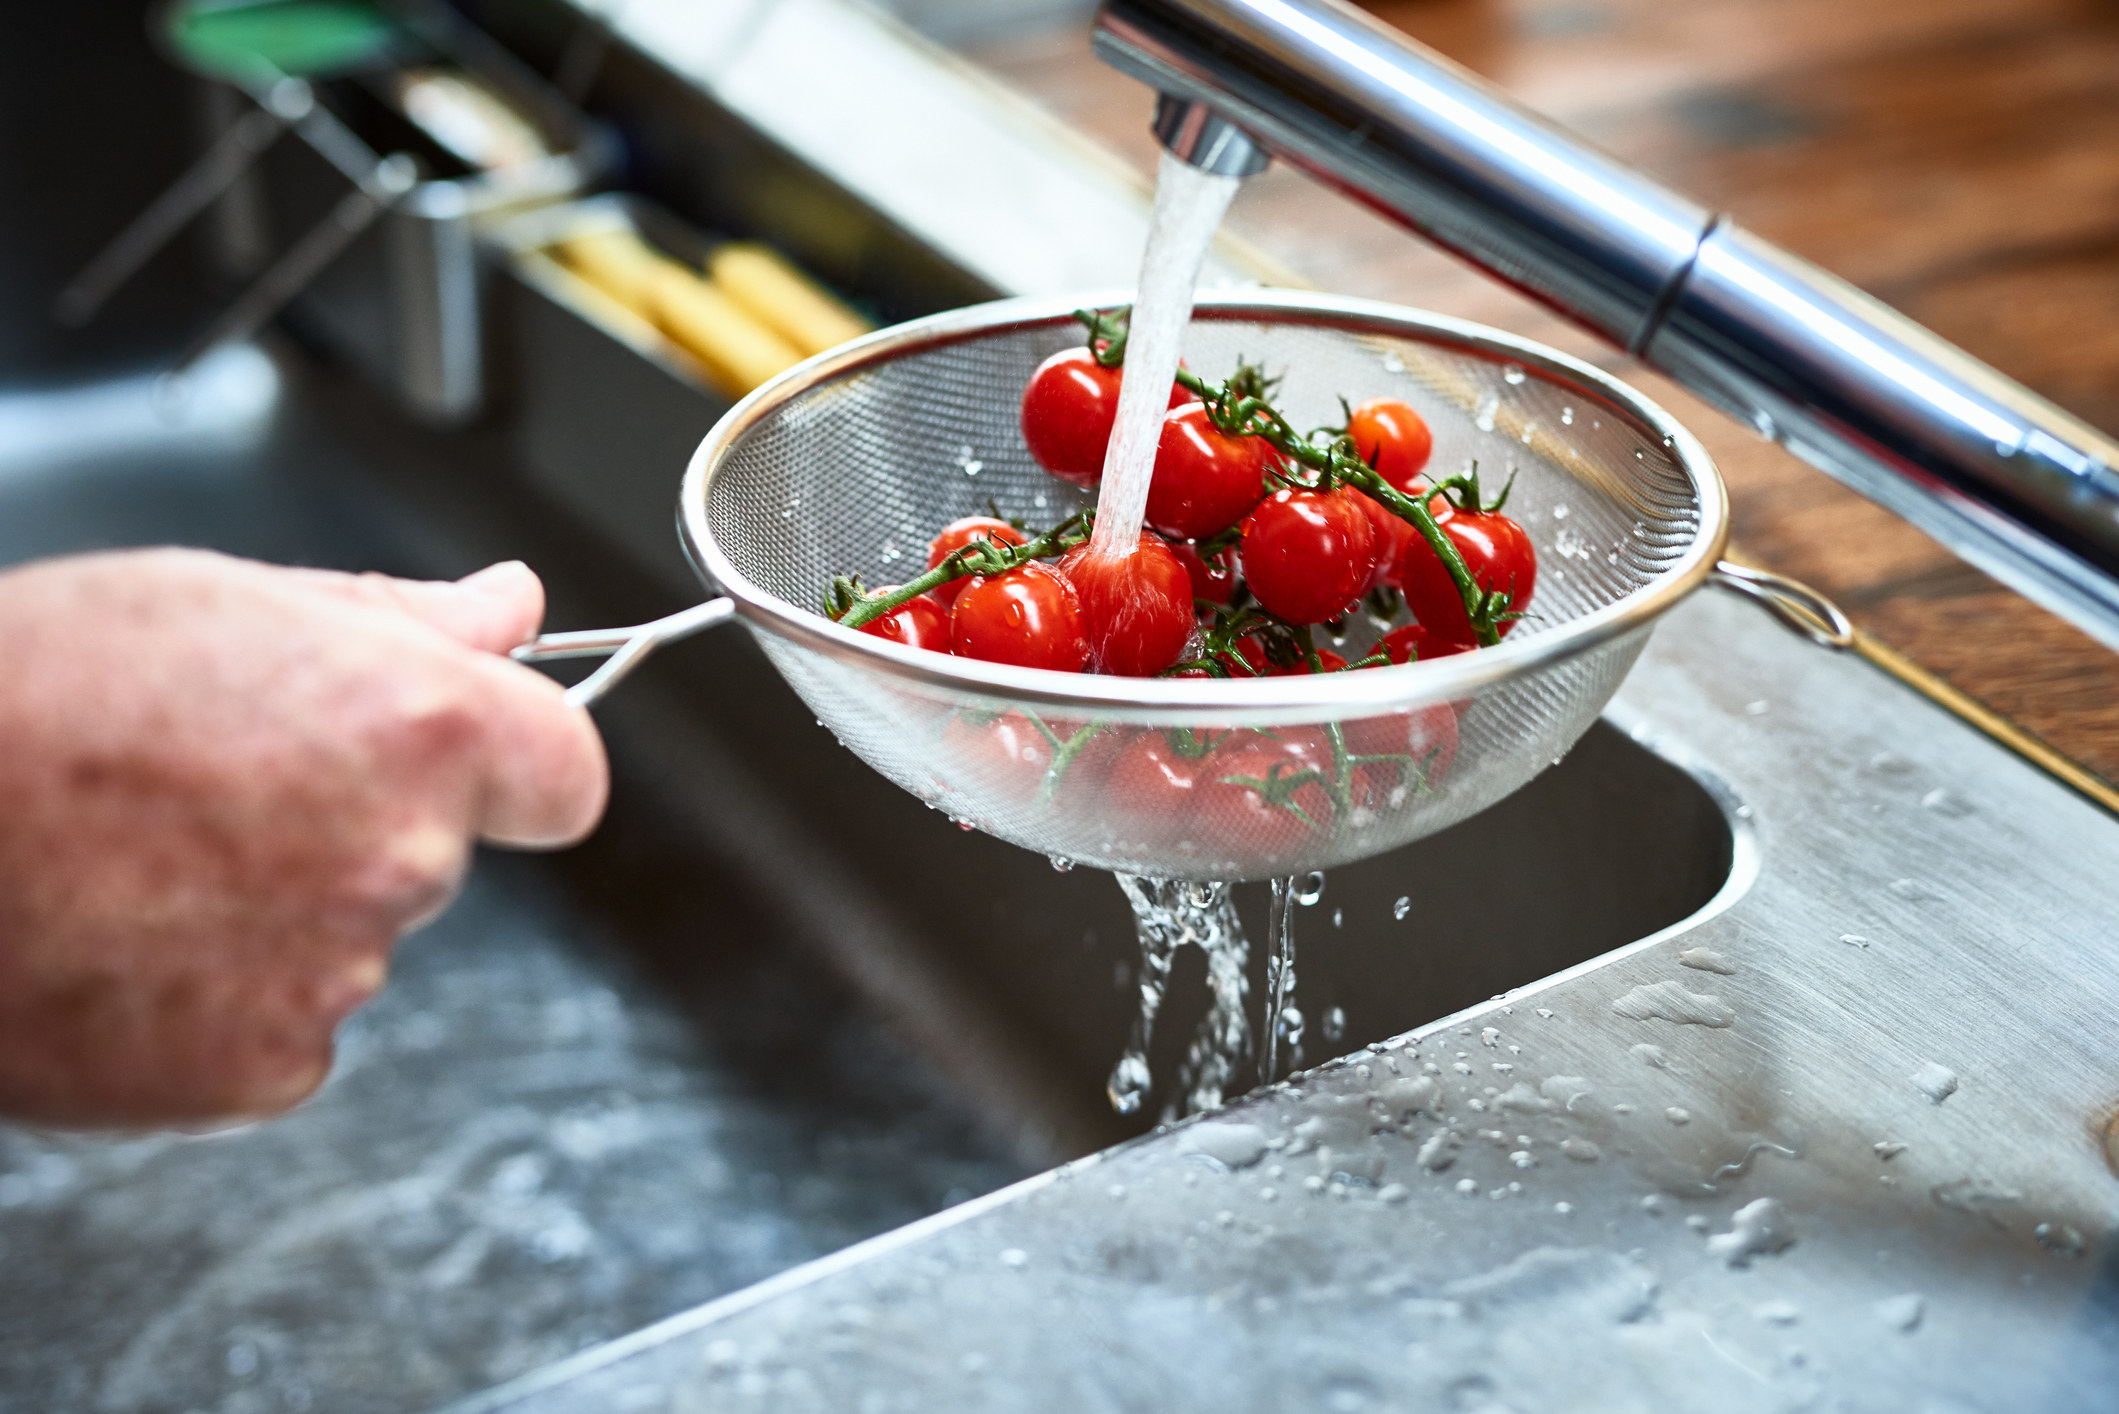 Washing tomatoes in sink 